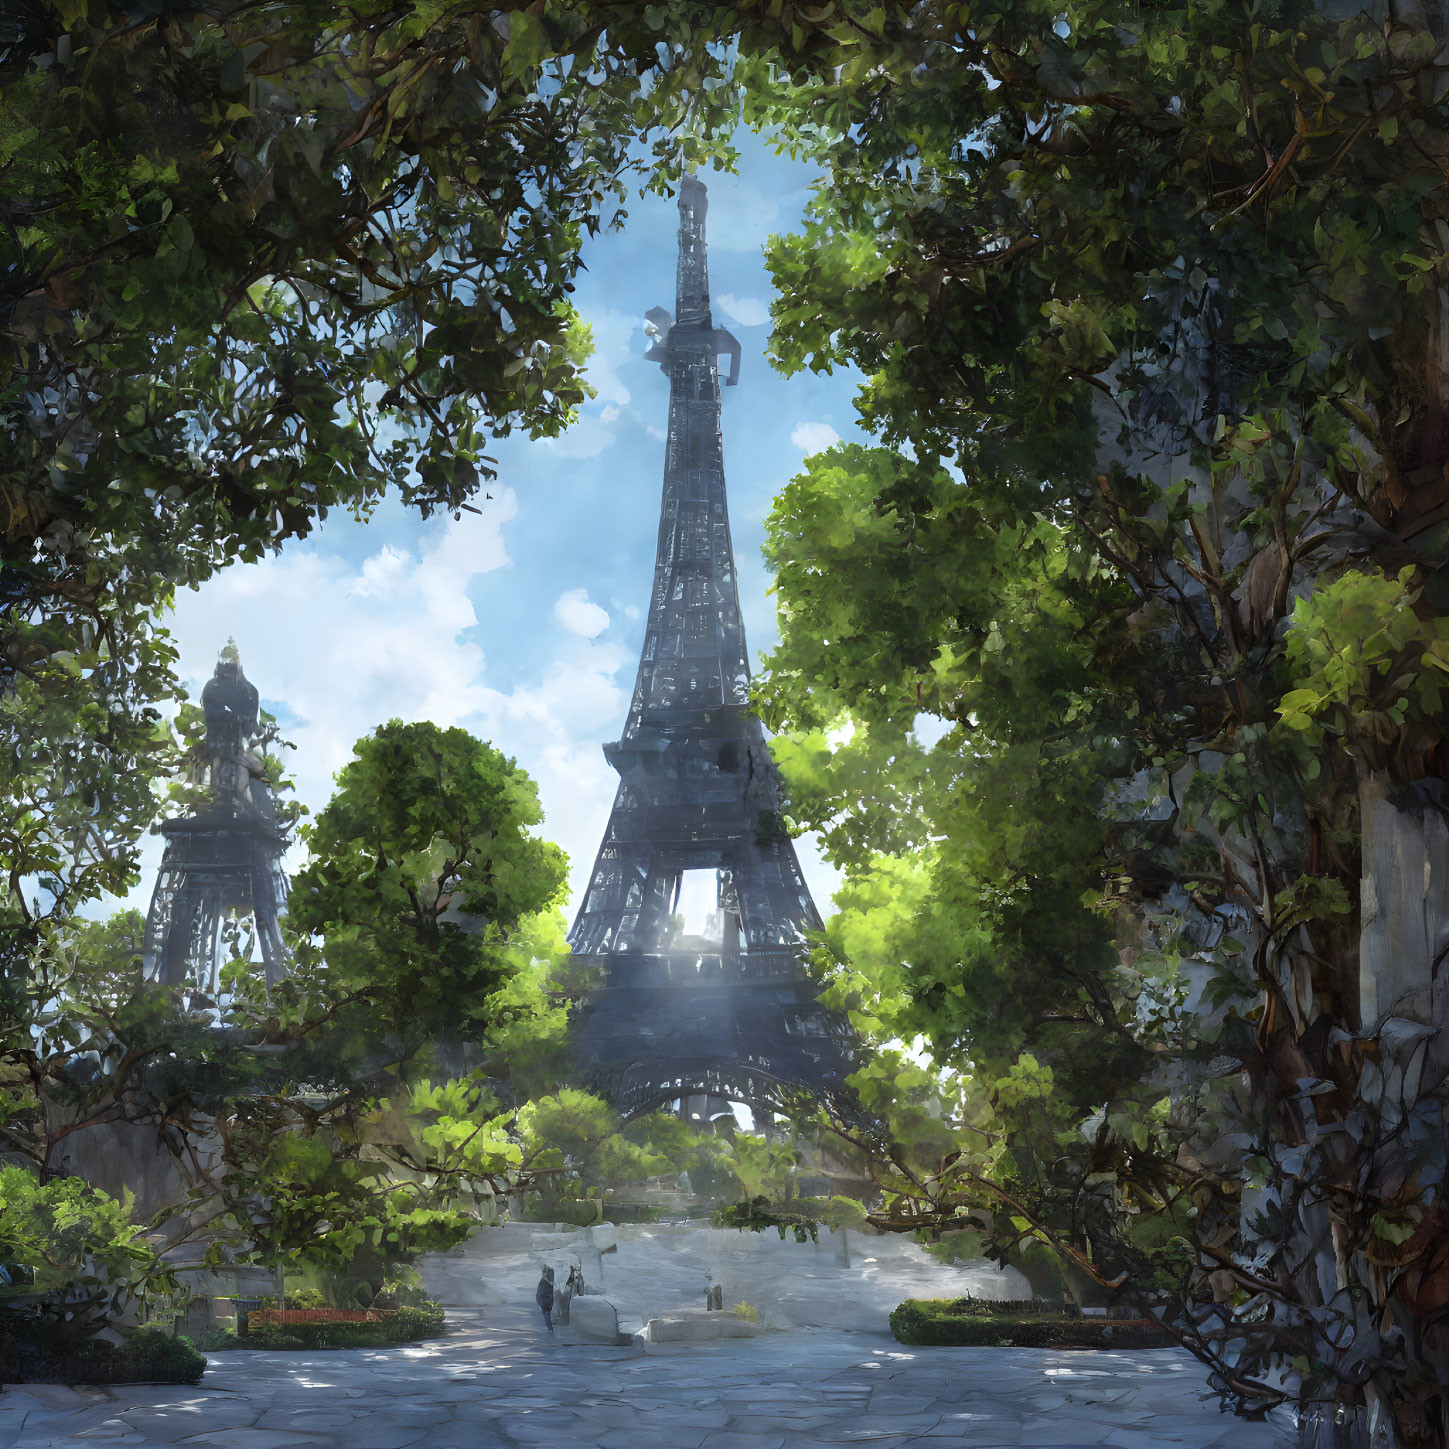 Tranquil Eiffel Tower scene with lush greenery and clear blue sky